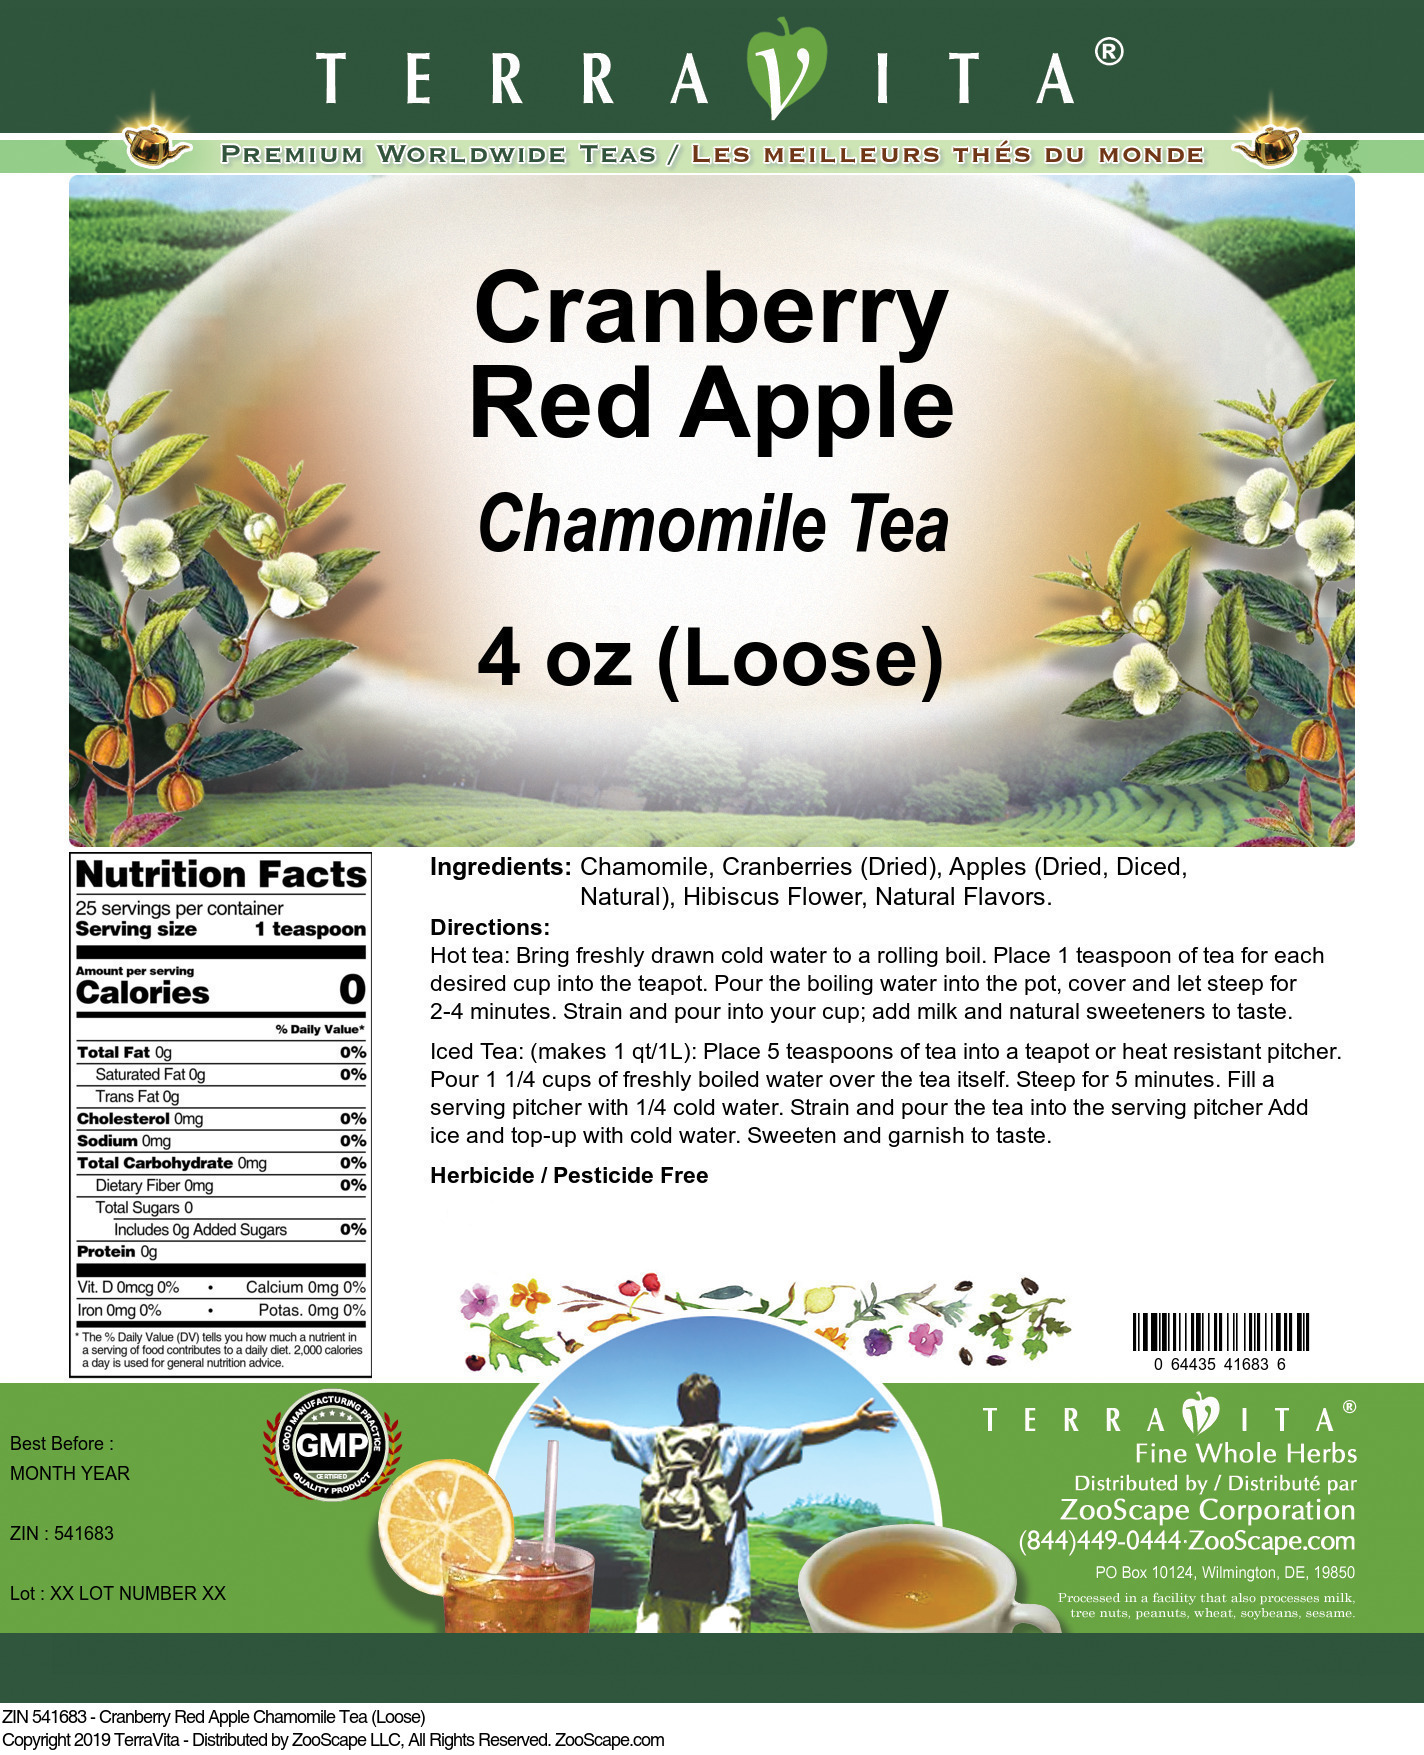 Cranberry Red Apple Chamomile Tea (Loose) - Label